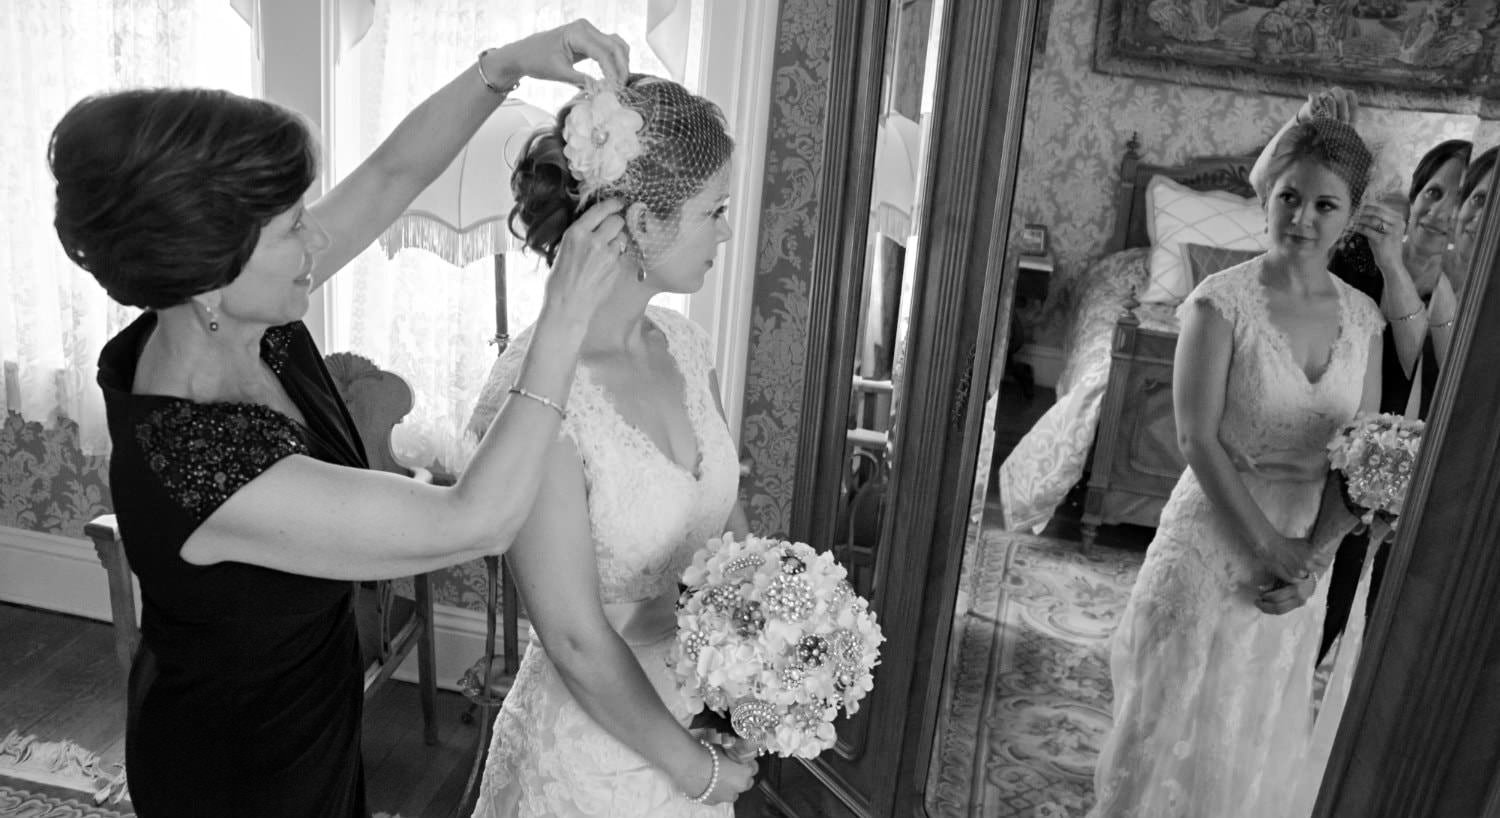 Black and white photo of bride holding bouquet in front of tall mirror while an older woman adjusts her hair